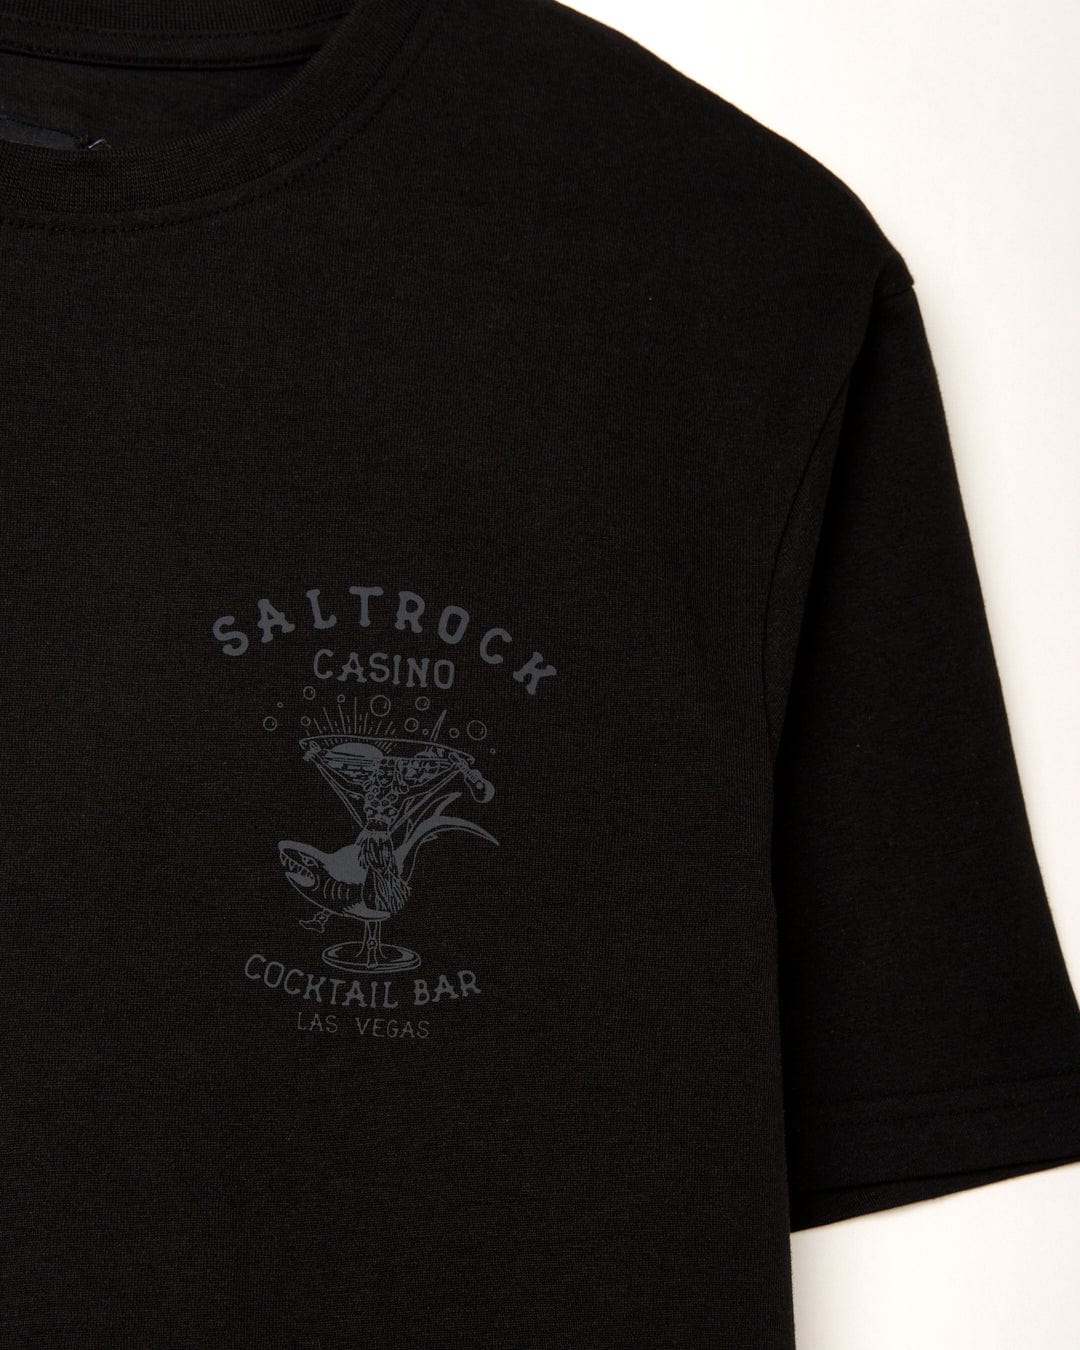 A black cotton Vegas Cocktail - Mens Short Sleeve T-Shirt with "Saltrock" printed on it.